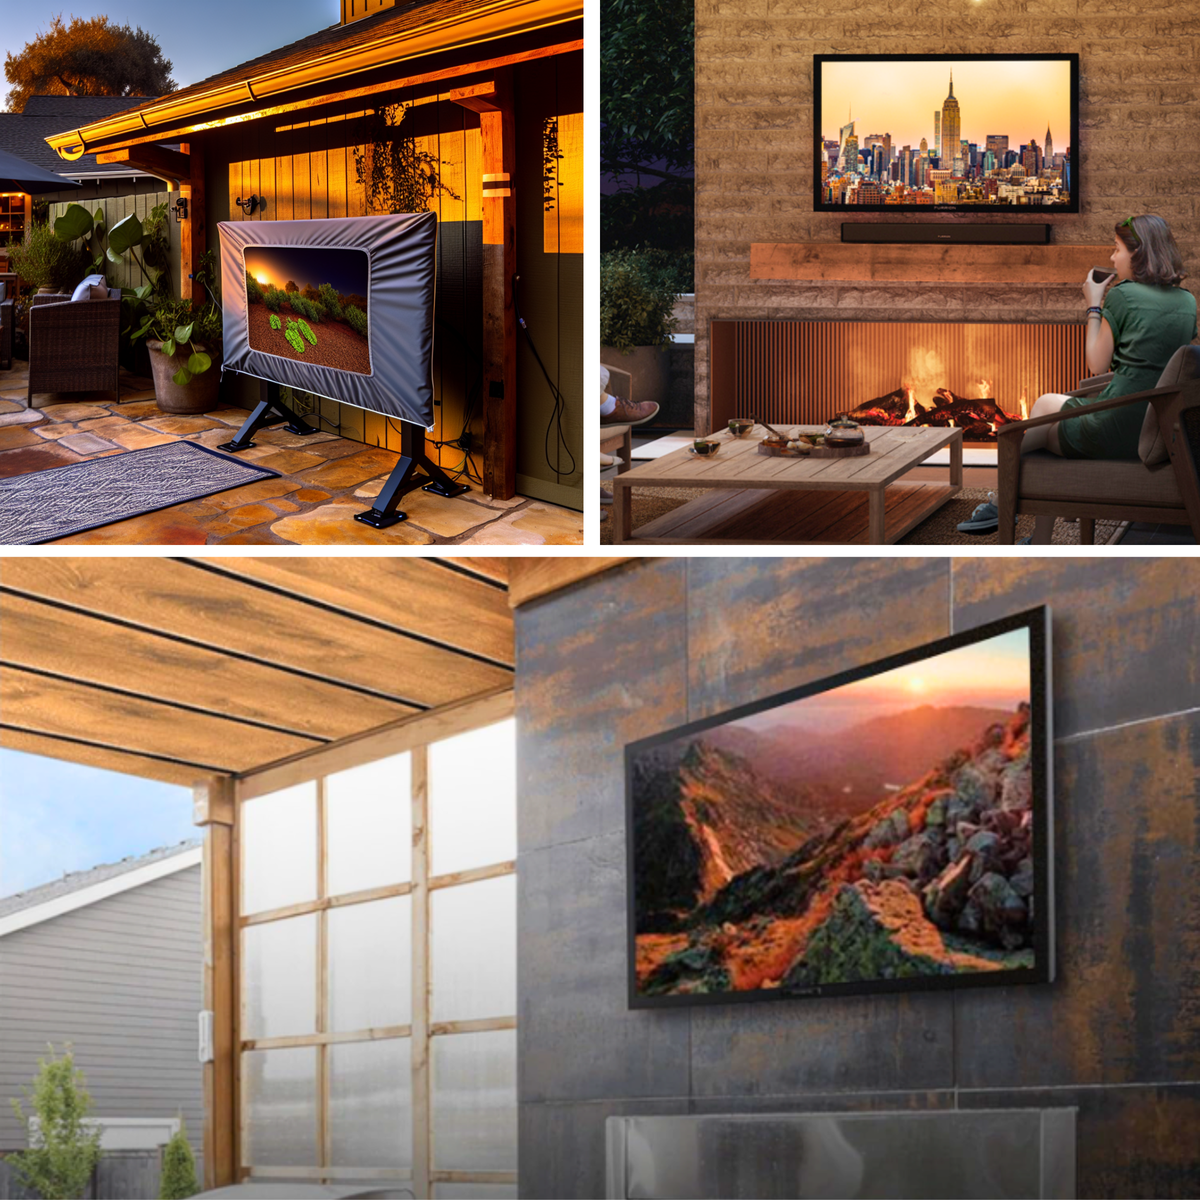 Expensive Outdoor TV Set ups in patio and back yard.